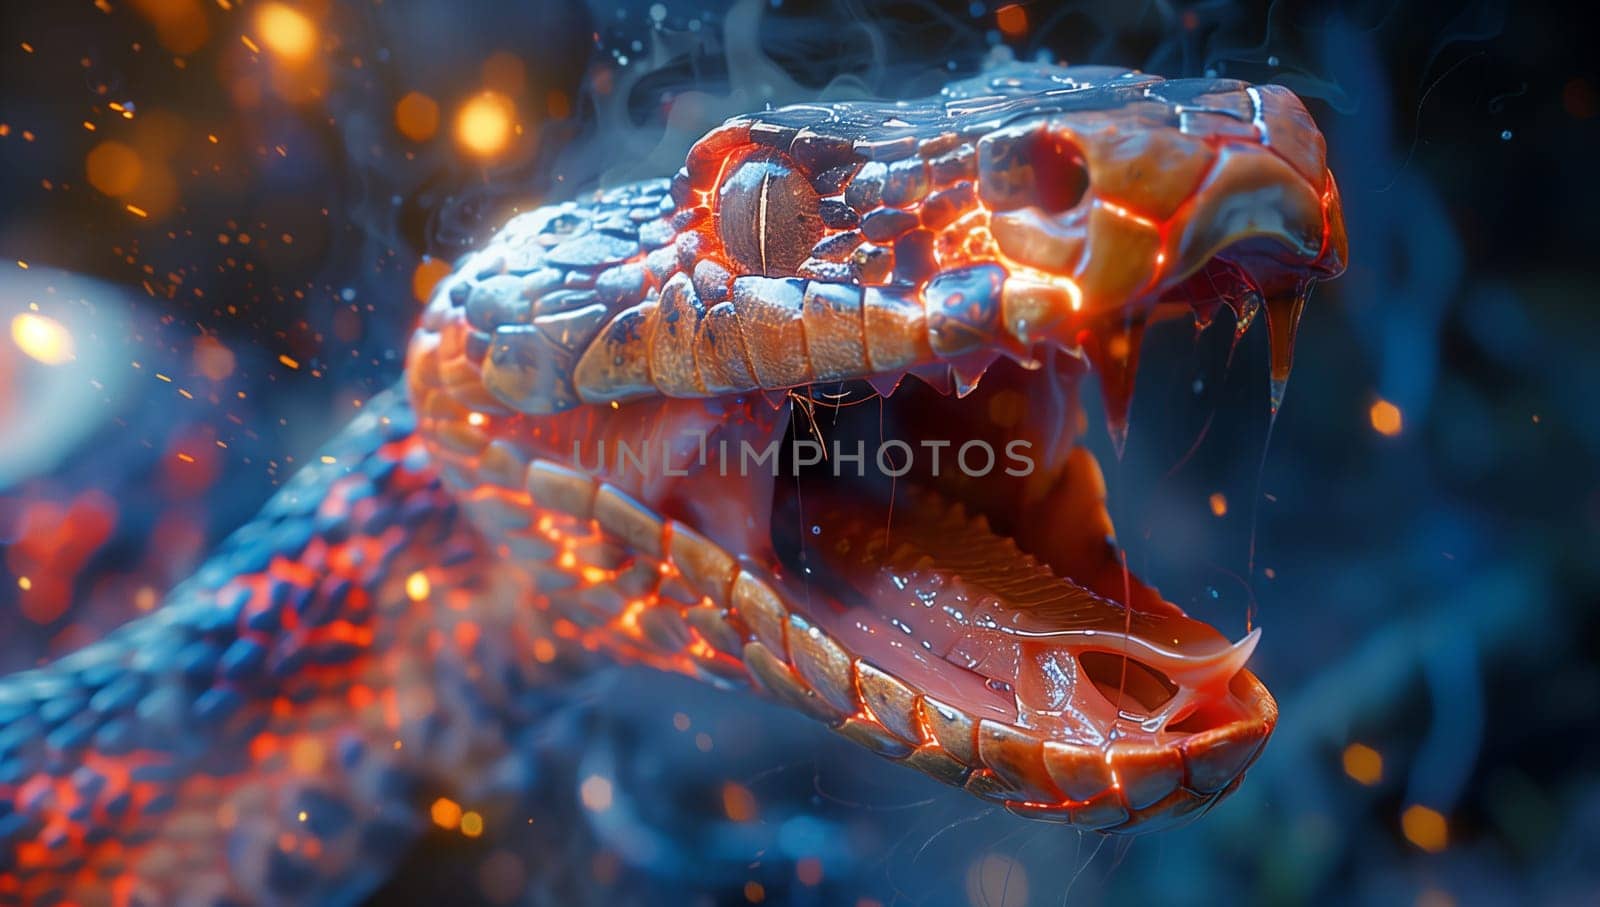 A close up of an electric blue snake, a terrestrial animal, with its mouth open showing its flesh and liquid inside, captured in macro photography